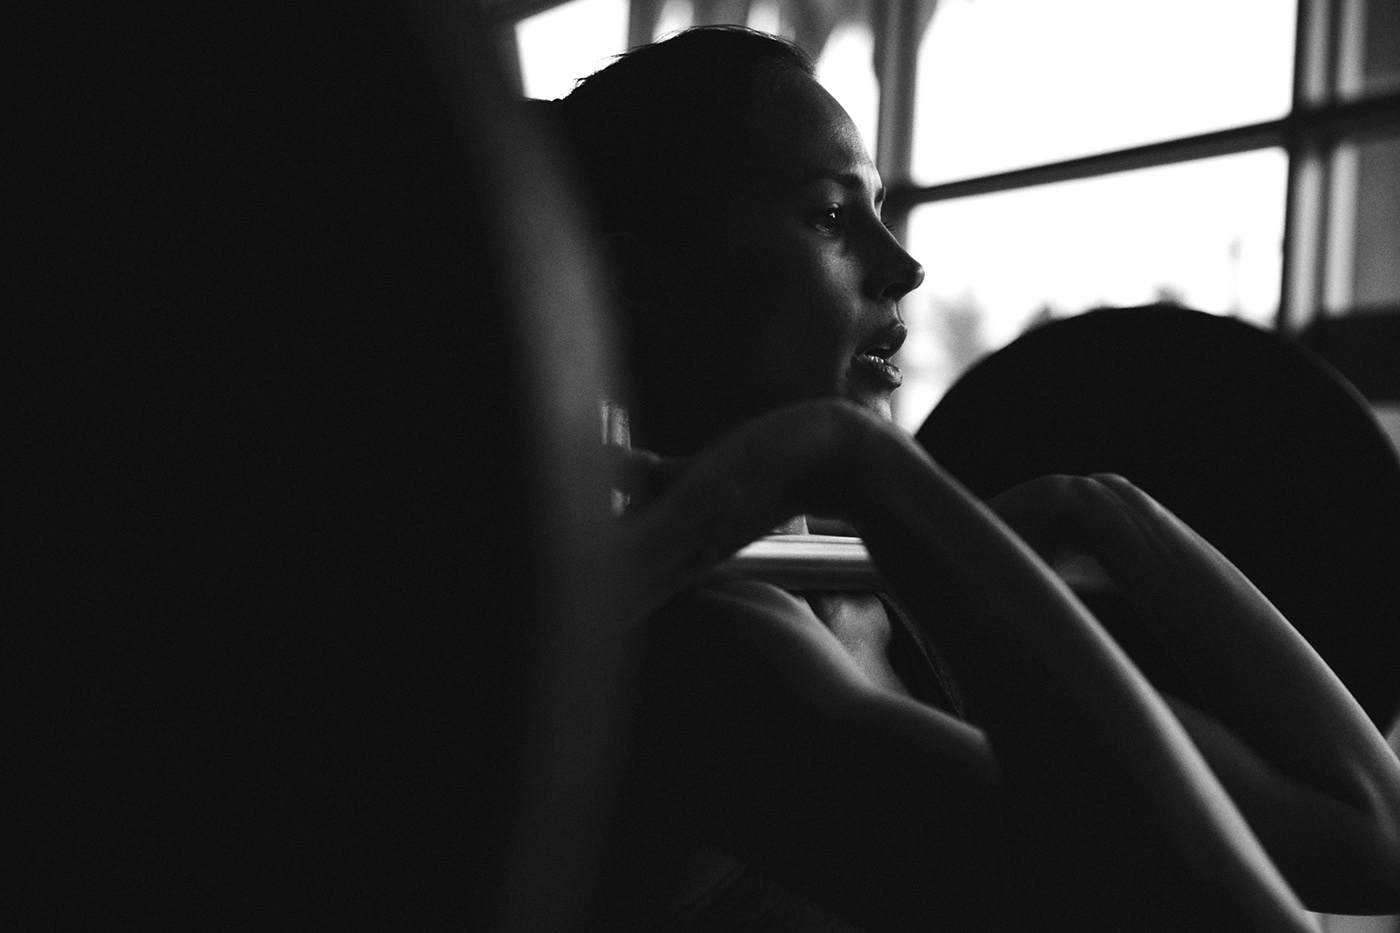 Woman concentrating and focussing on lifting weights in a fitness studio. Black and white photograph